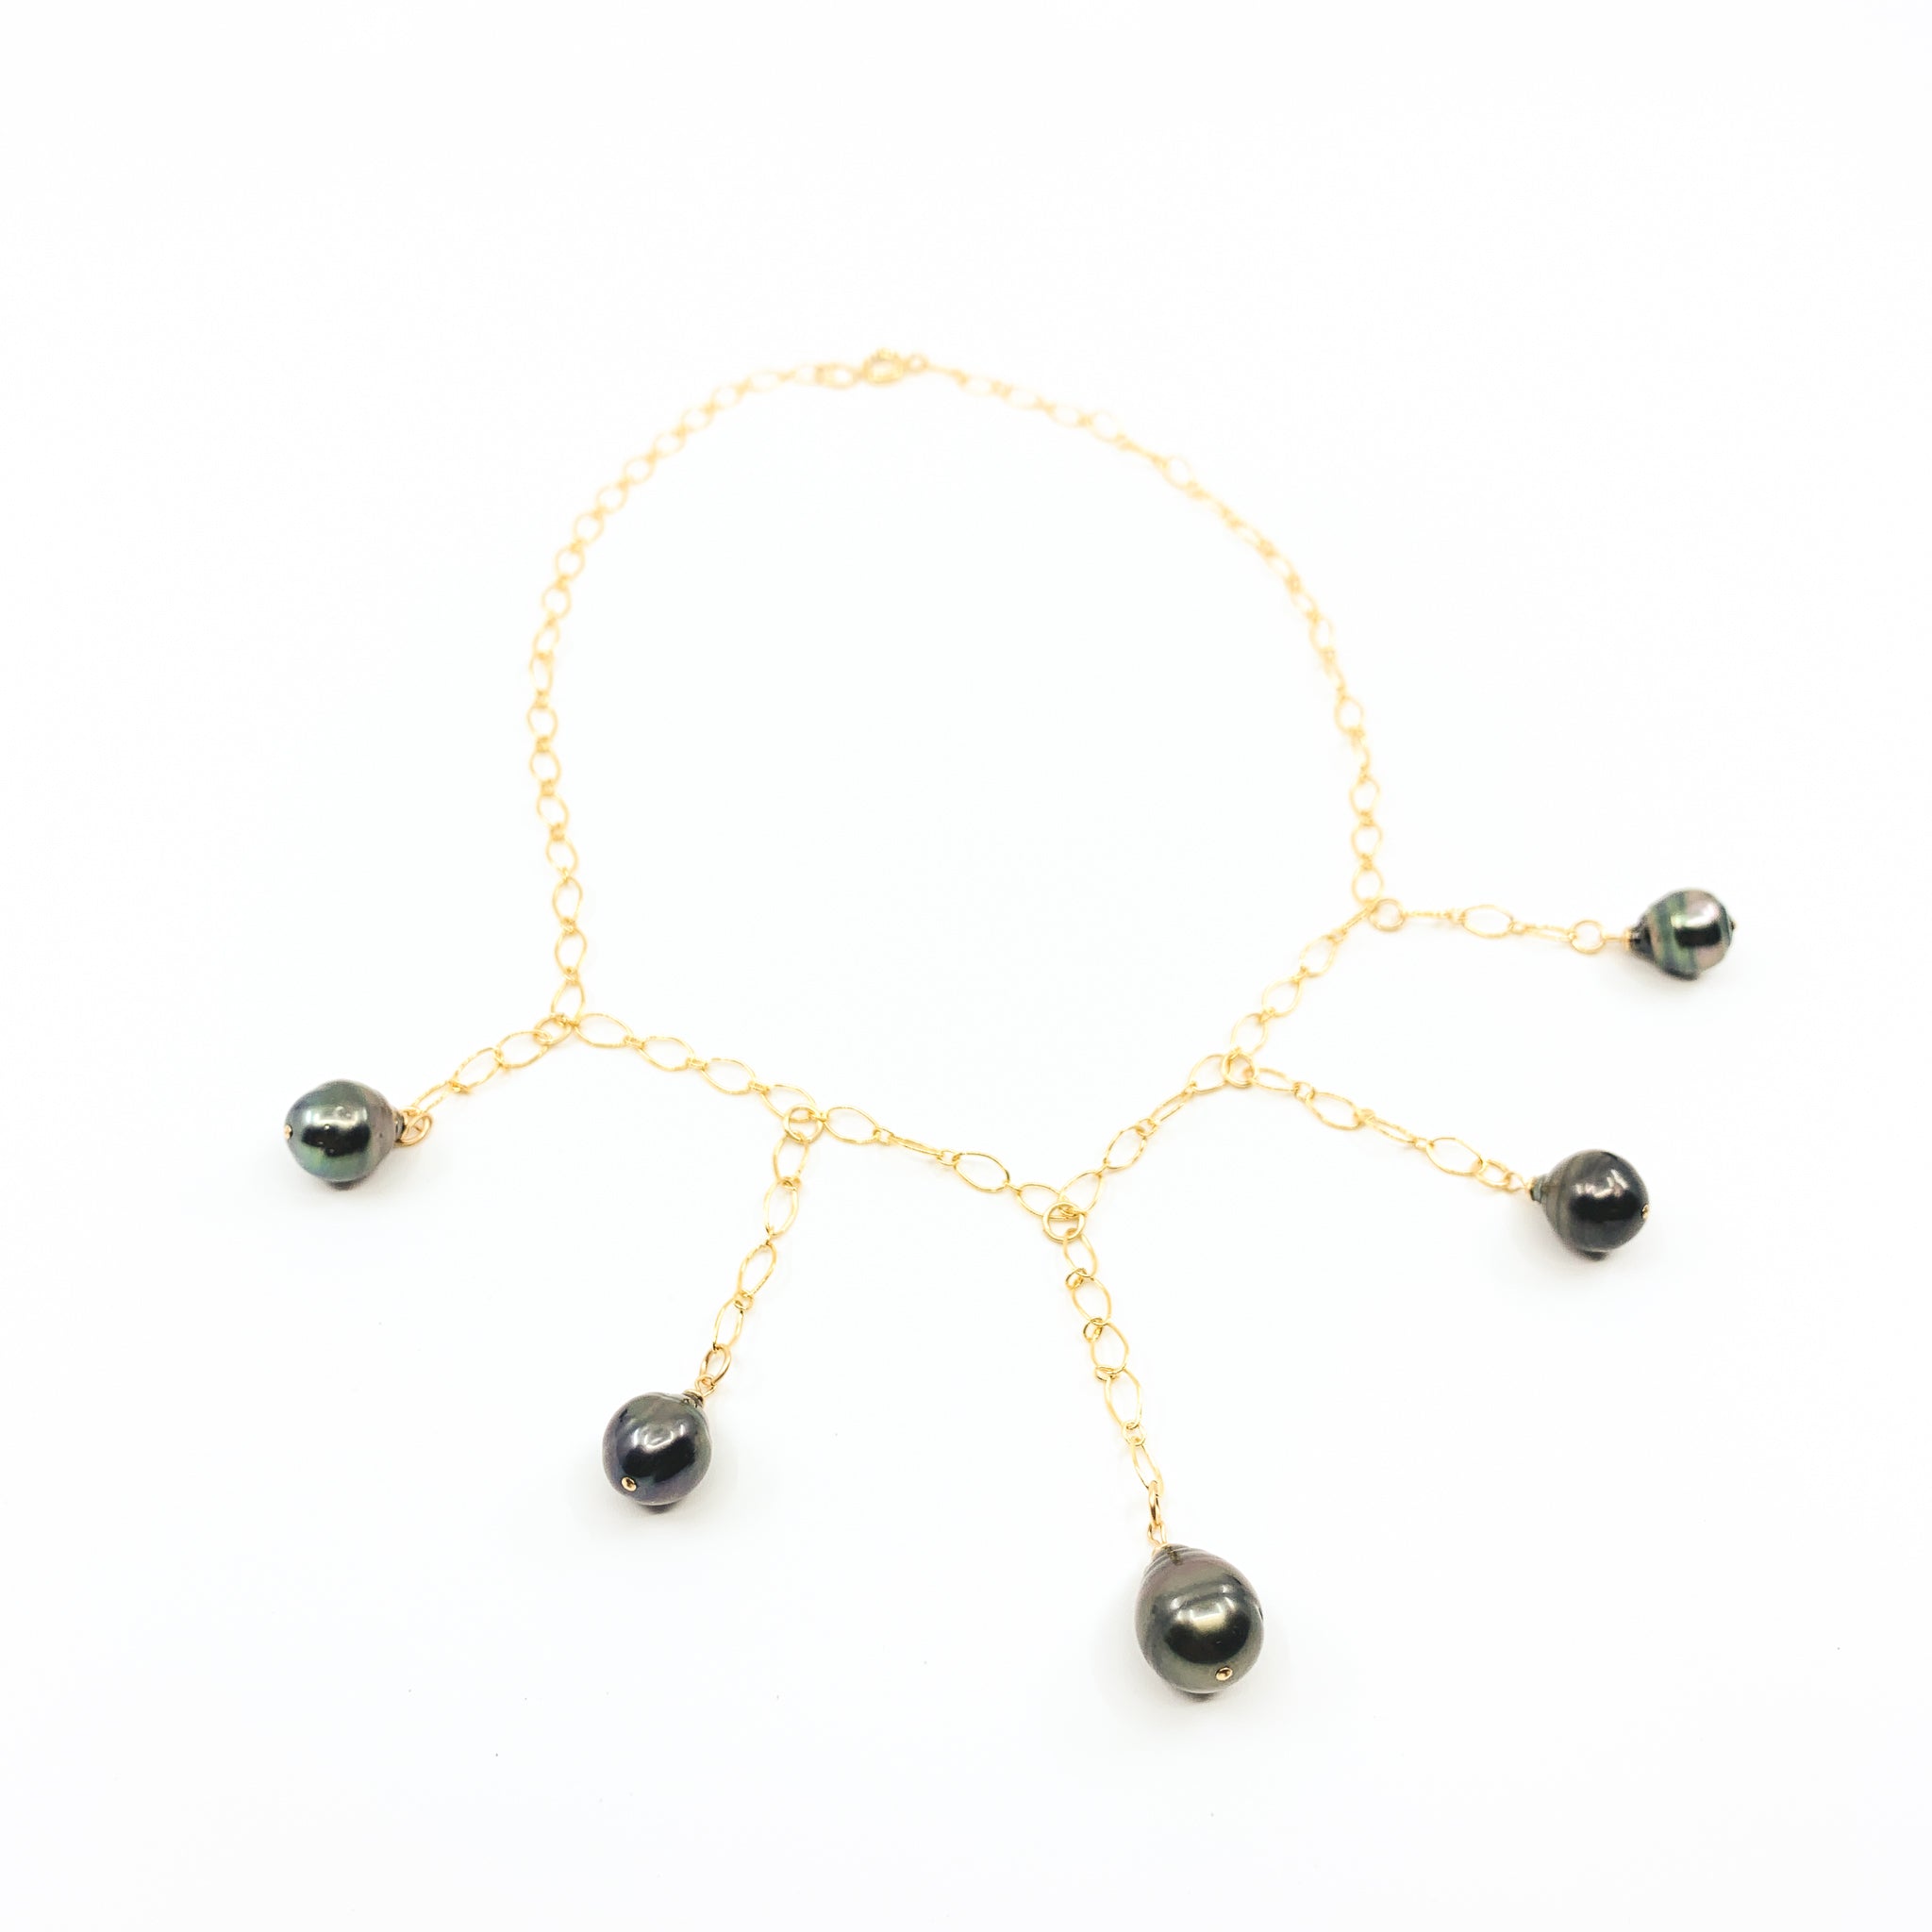 Tahitian pearl gold collar necklace by eve black jewelry made in hawaii